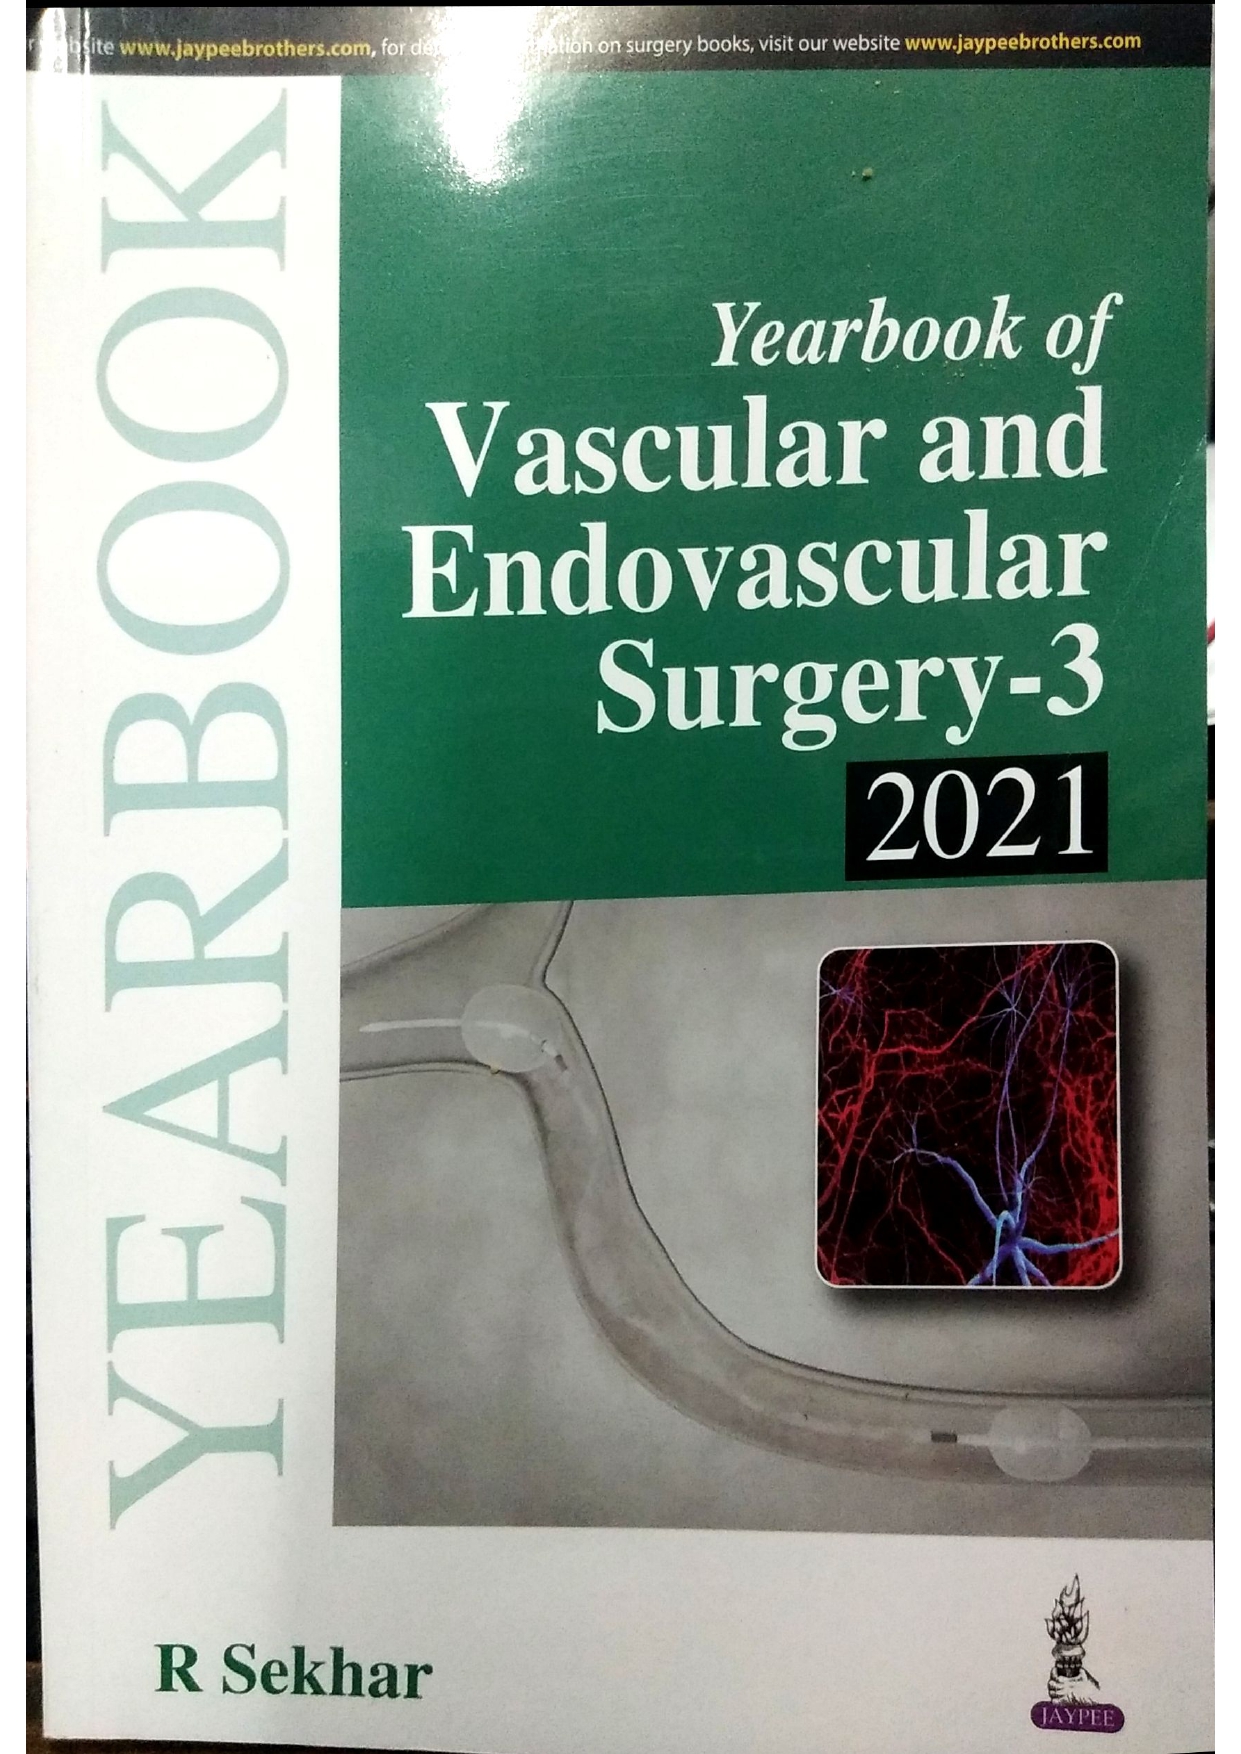 Yearbook Of Vascular And Endovascular Surgery -3